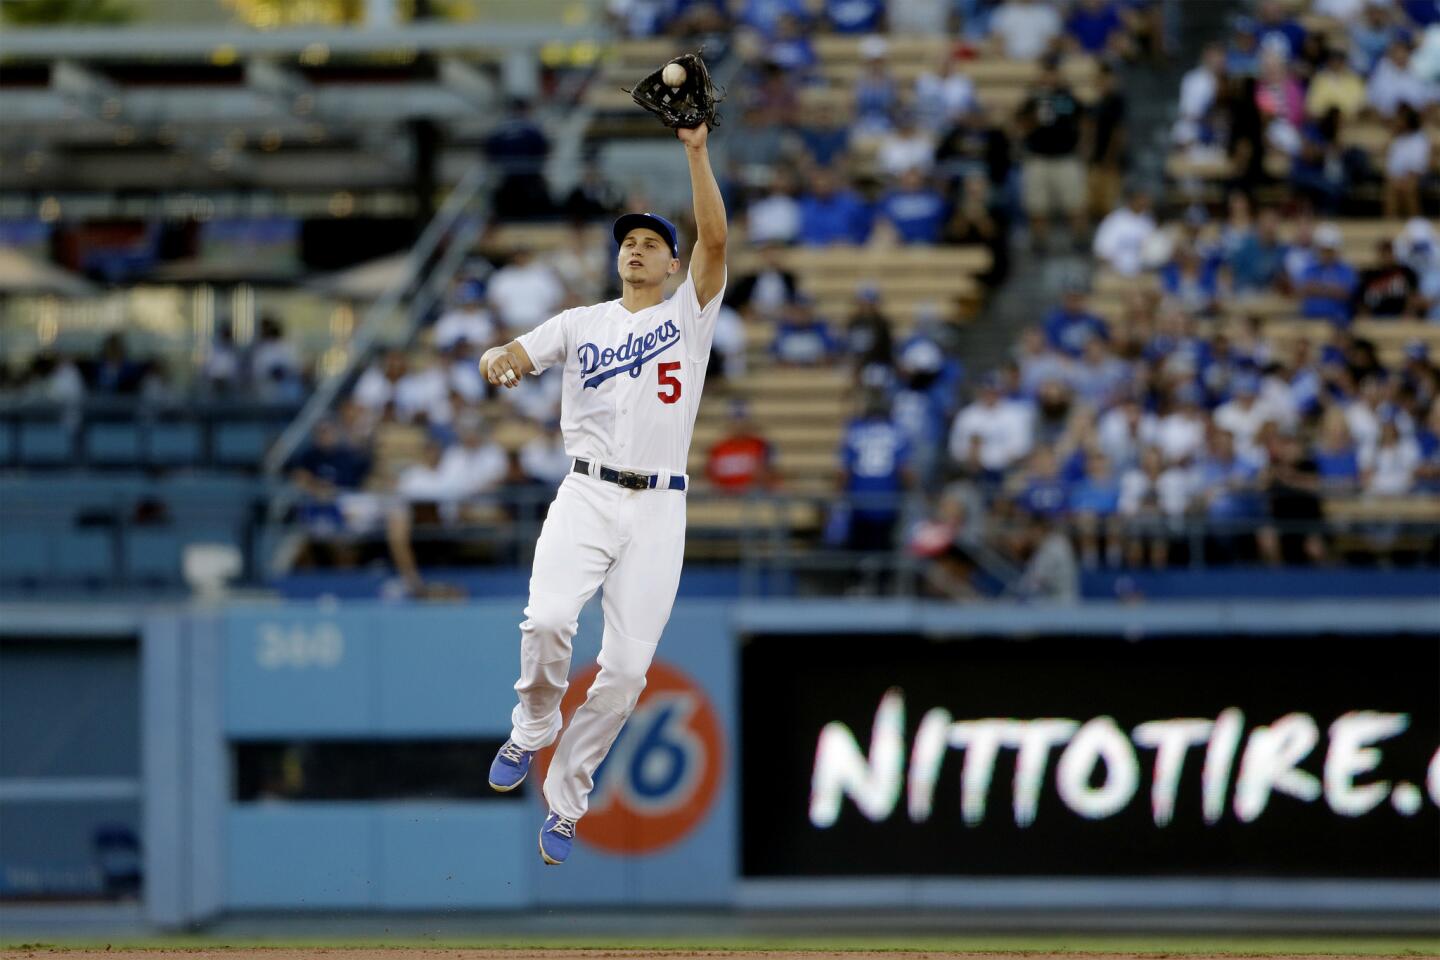 Dodgers shortstop Corey Seage leaps to catch a line drive against the Giants in the first inning.